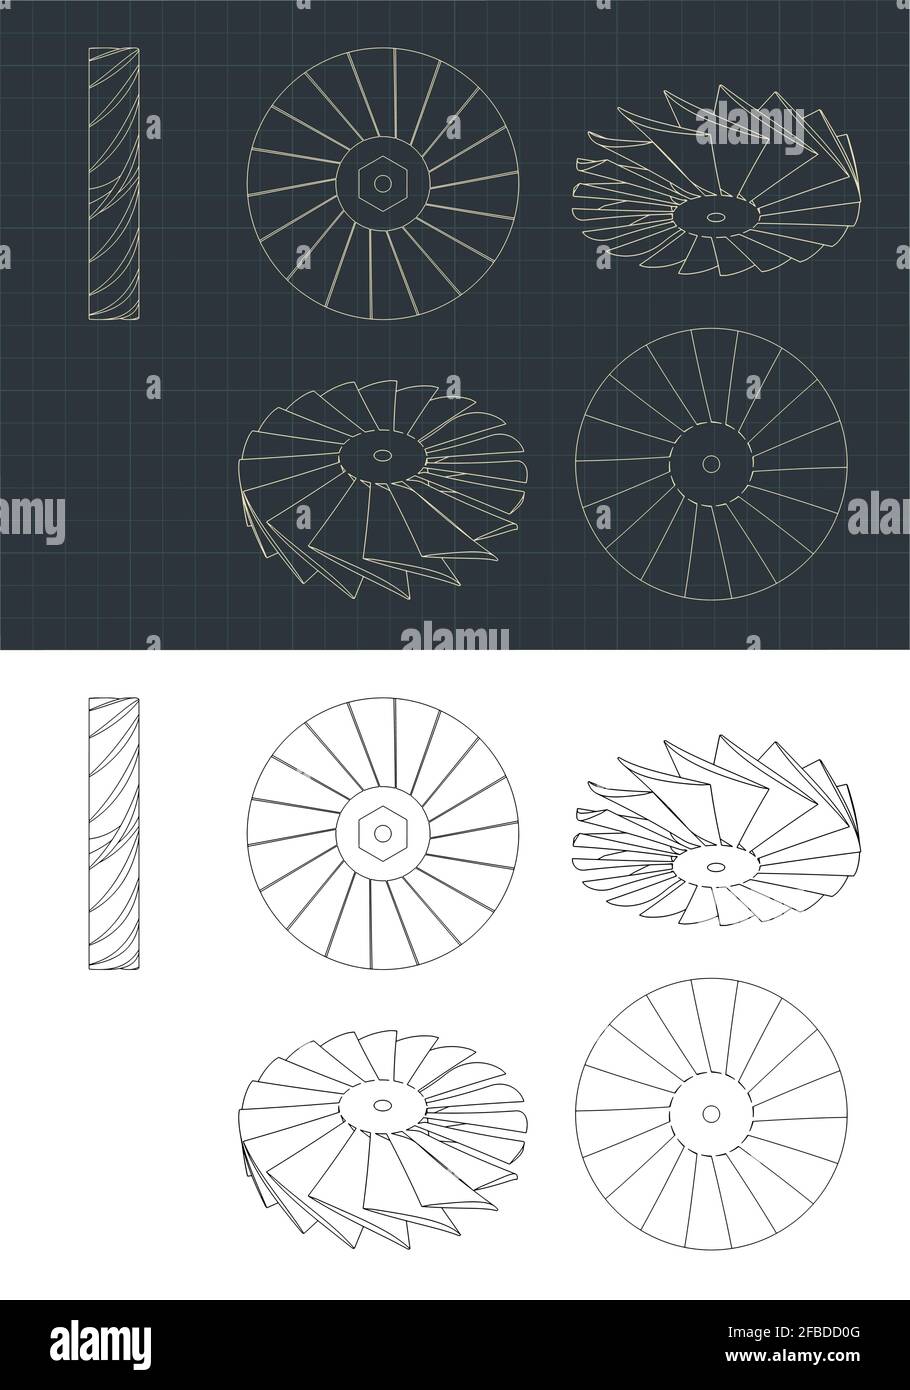 Stylized vector illustration of turbine rotor drawings Stock Vector